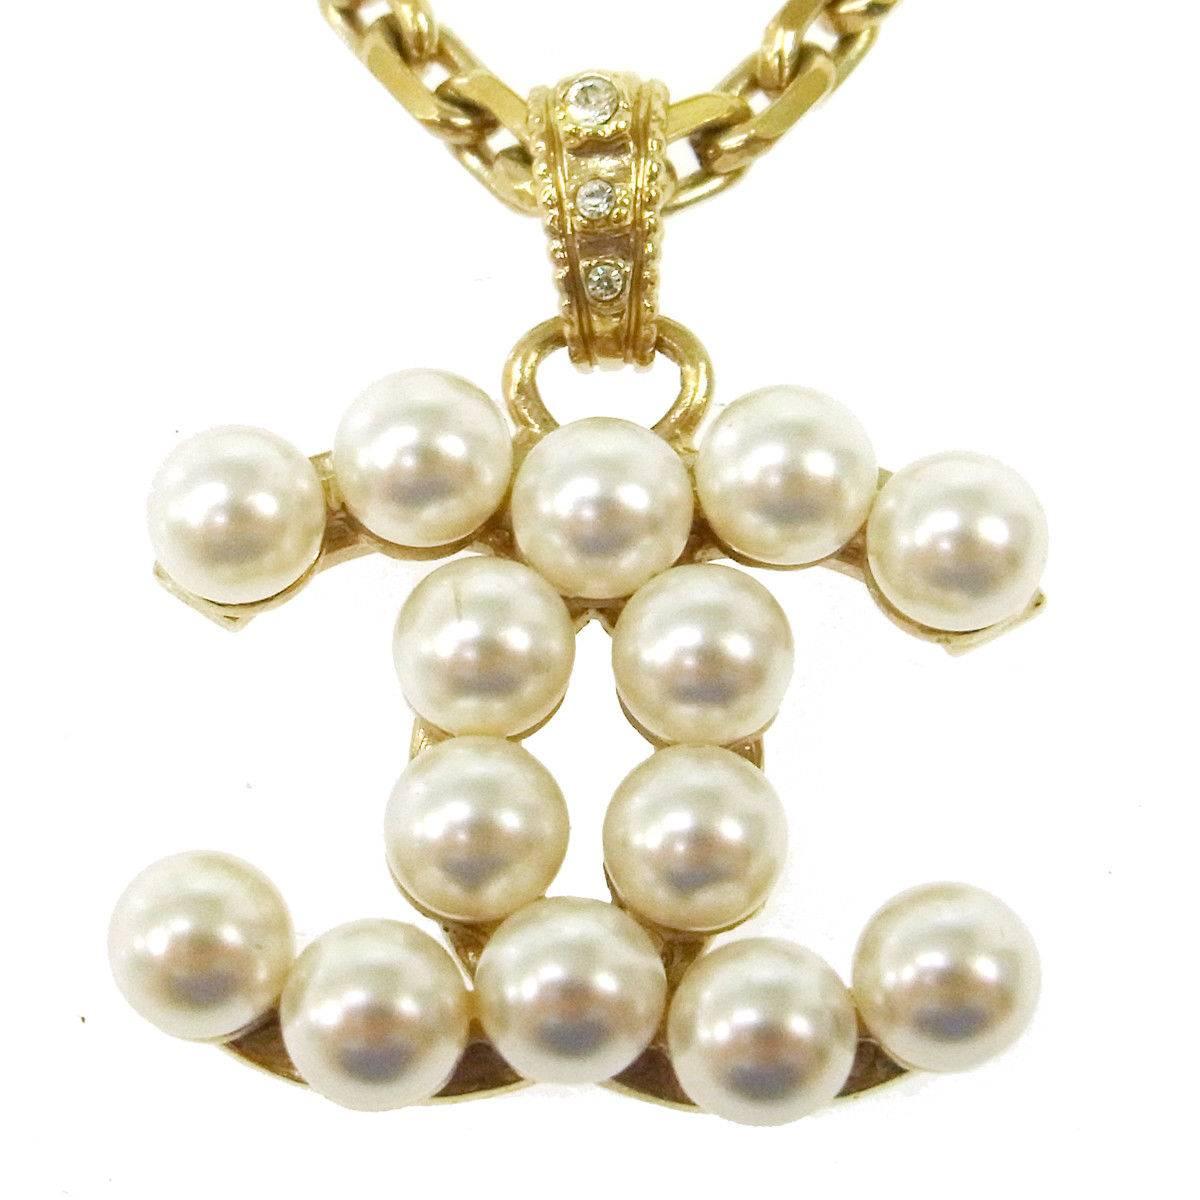 CURATOR'S NOTES

Chanel Gold Pearl Charm Chain Link Drape Drop Evening Pendant Necklace 

Metal
Faux pearl
Gold tone hardware
Made in France
Charm diameter 1"
Chain length 17"